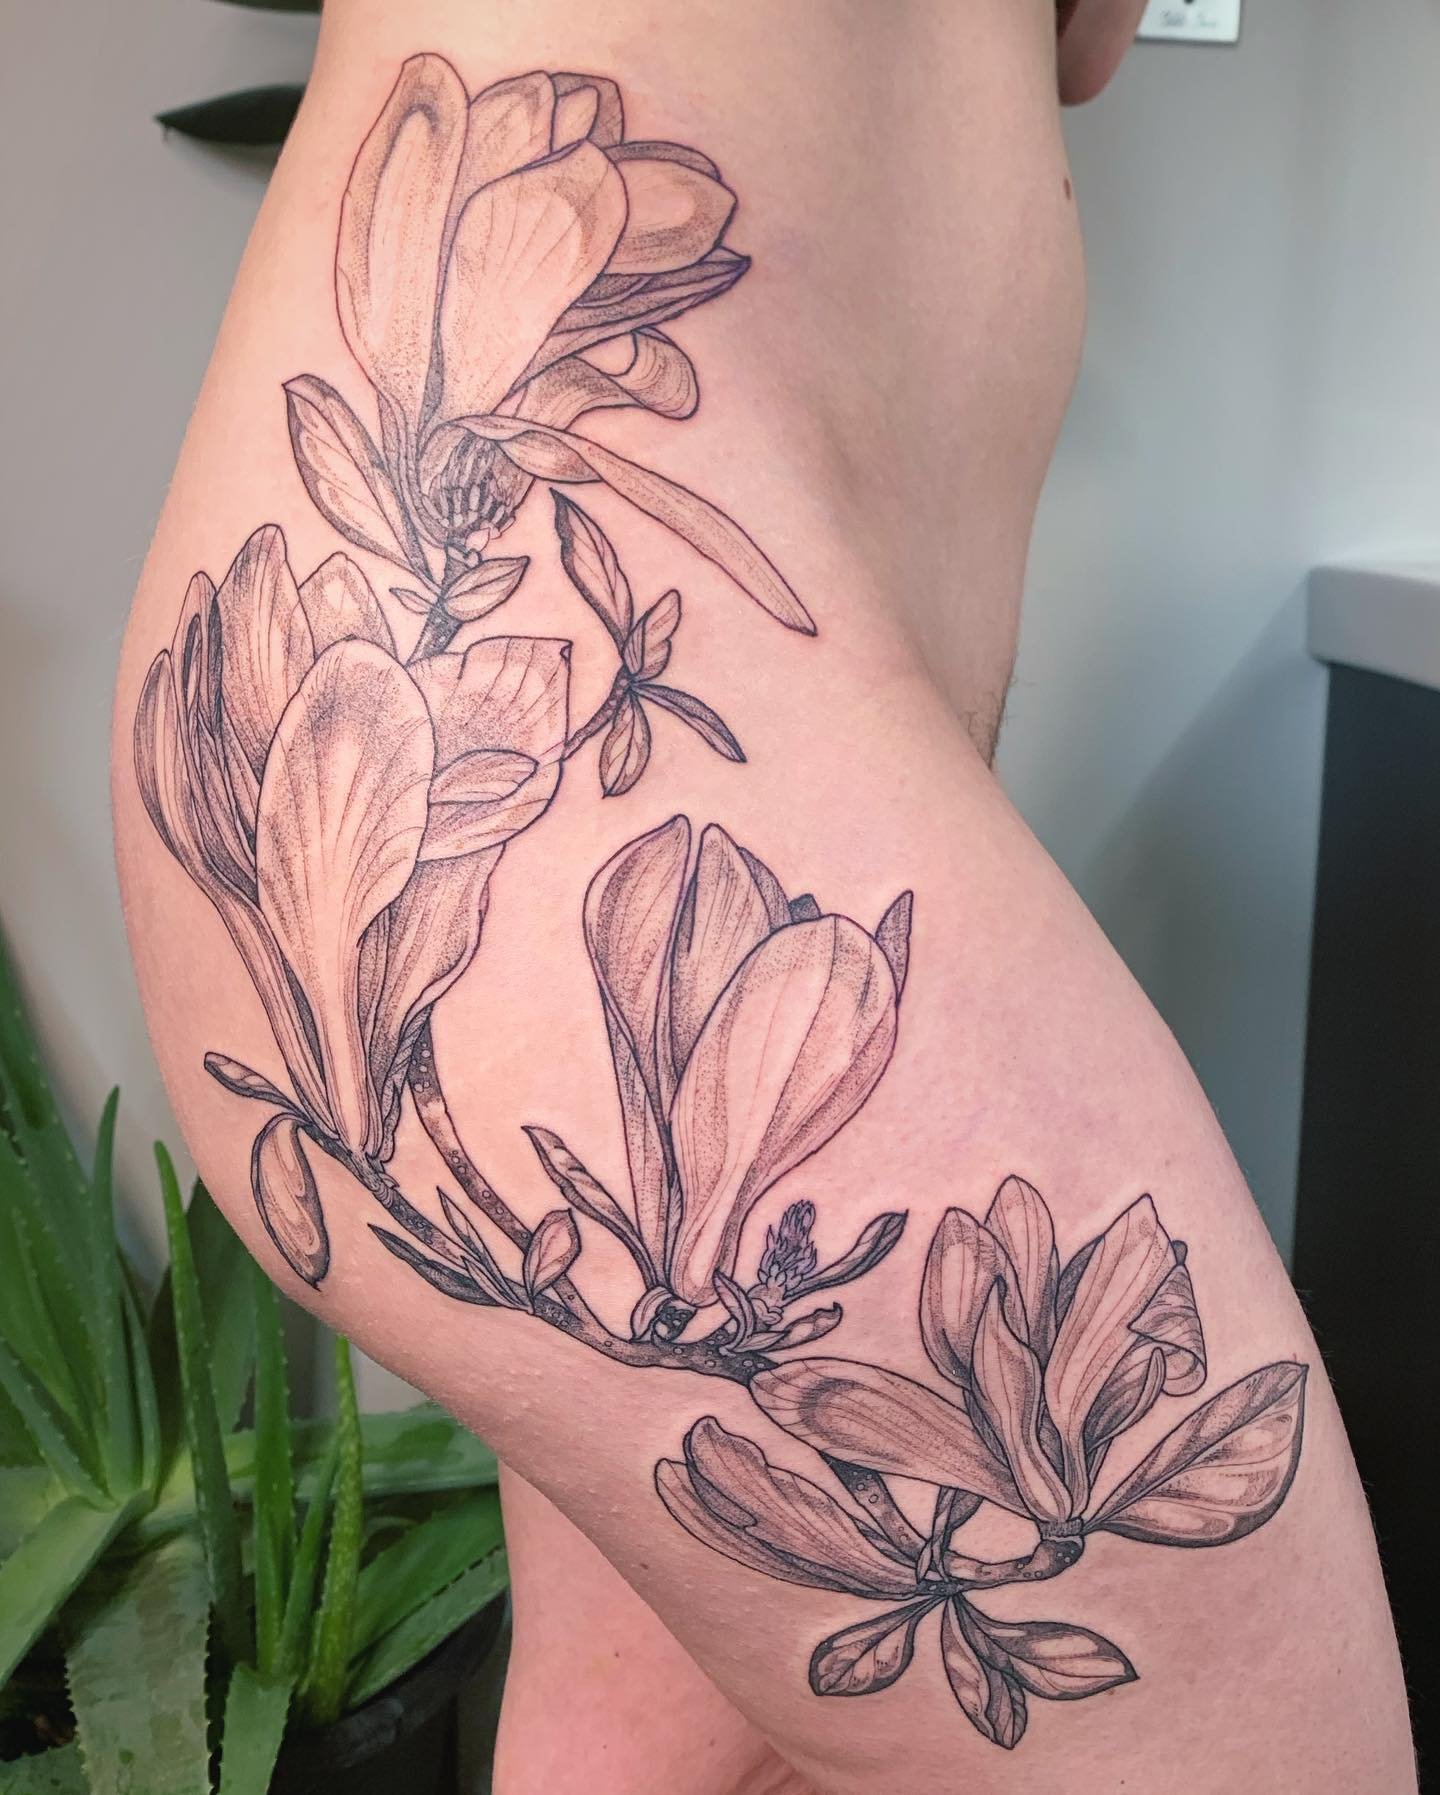 magnolias holding ancient ways &bull;
grateful for the chance to be with your soft skins

#Magnolia #MagnoliaTattoo #FloralTattooDesign #HipTattoos #BotanicalTattoos #YVRTattoo #YyJTattoo #PNWTattoo